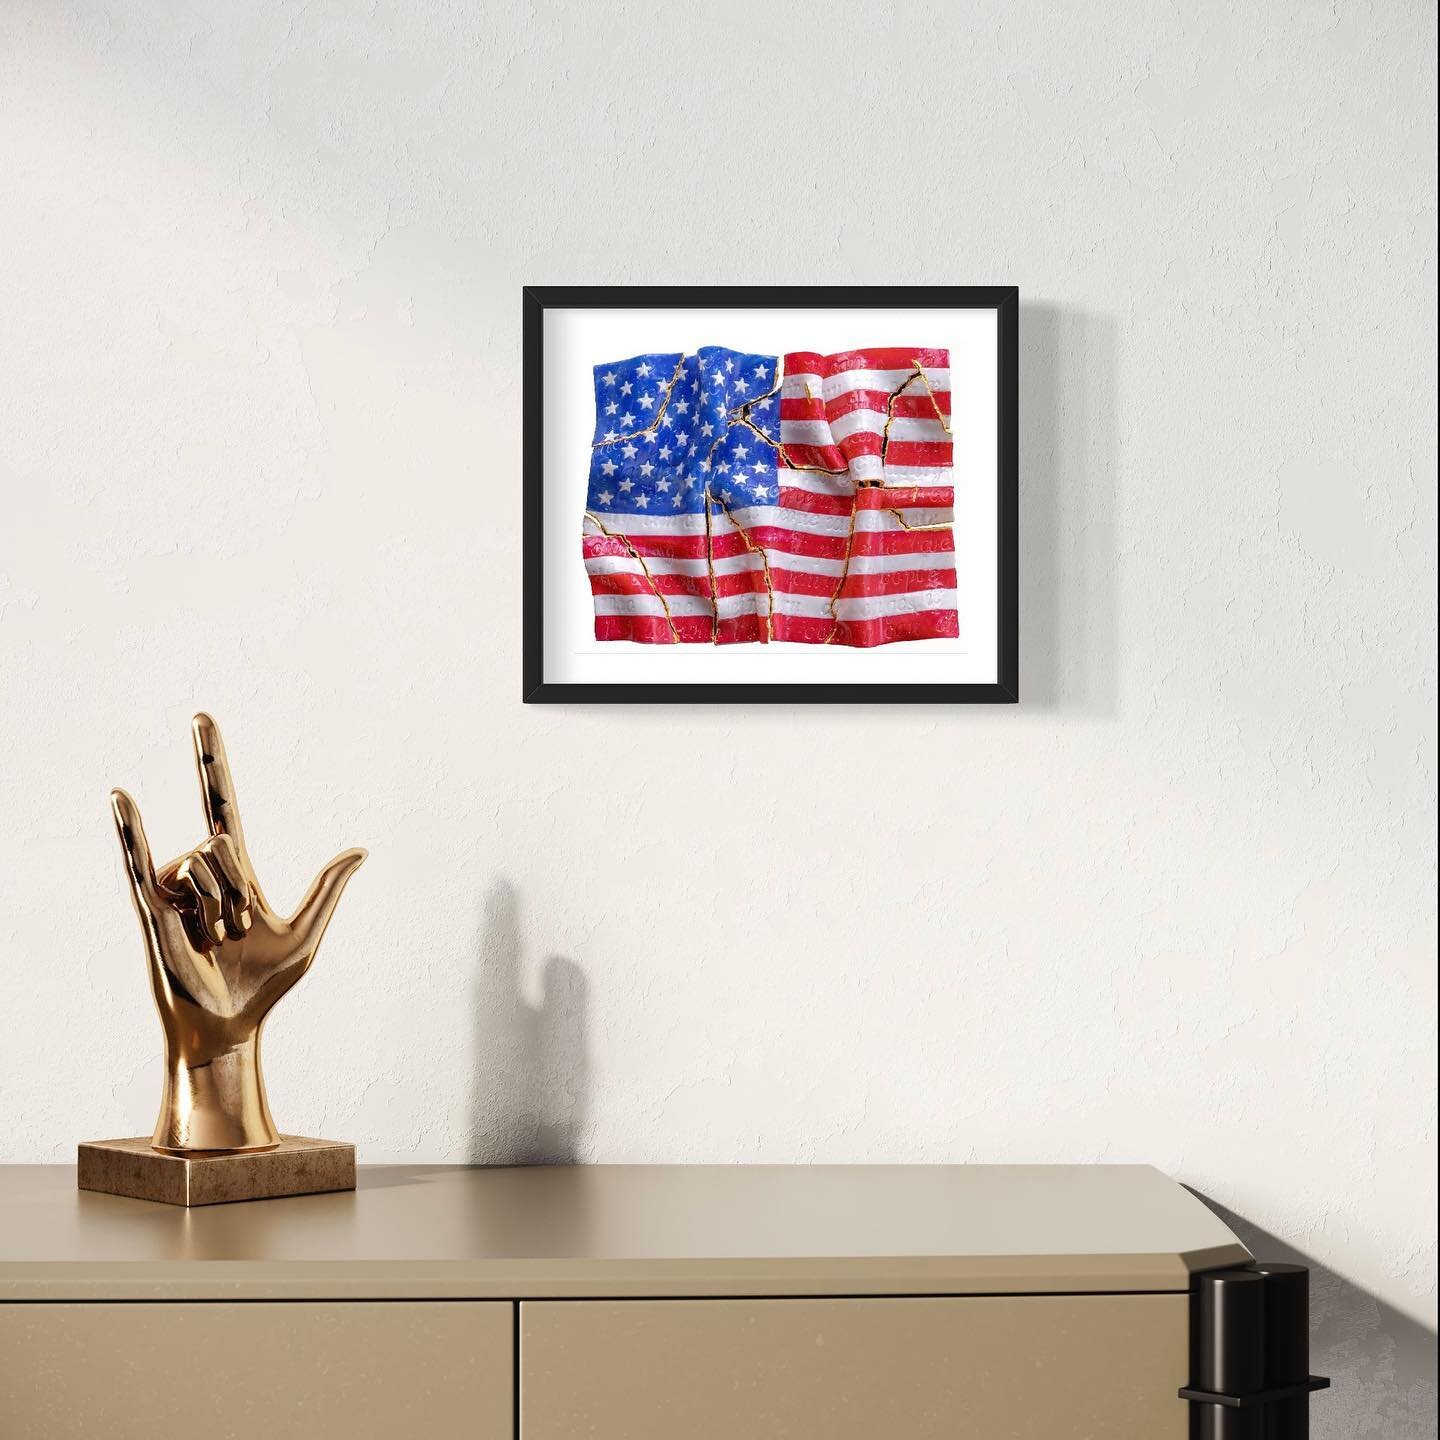 A few styled photos of &ldquo;Reclamation&rdquo; as a print 🇺🇸

This isn&rsquo;t just a flag. If you remember, I imprinted the quote &ldquo;people who love their country can change it&rdquo; all throughout the work. And you can see that in the prin